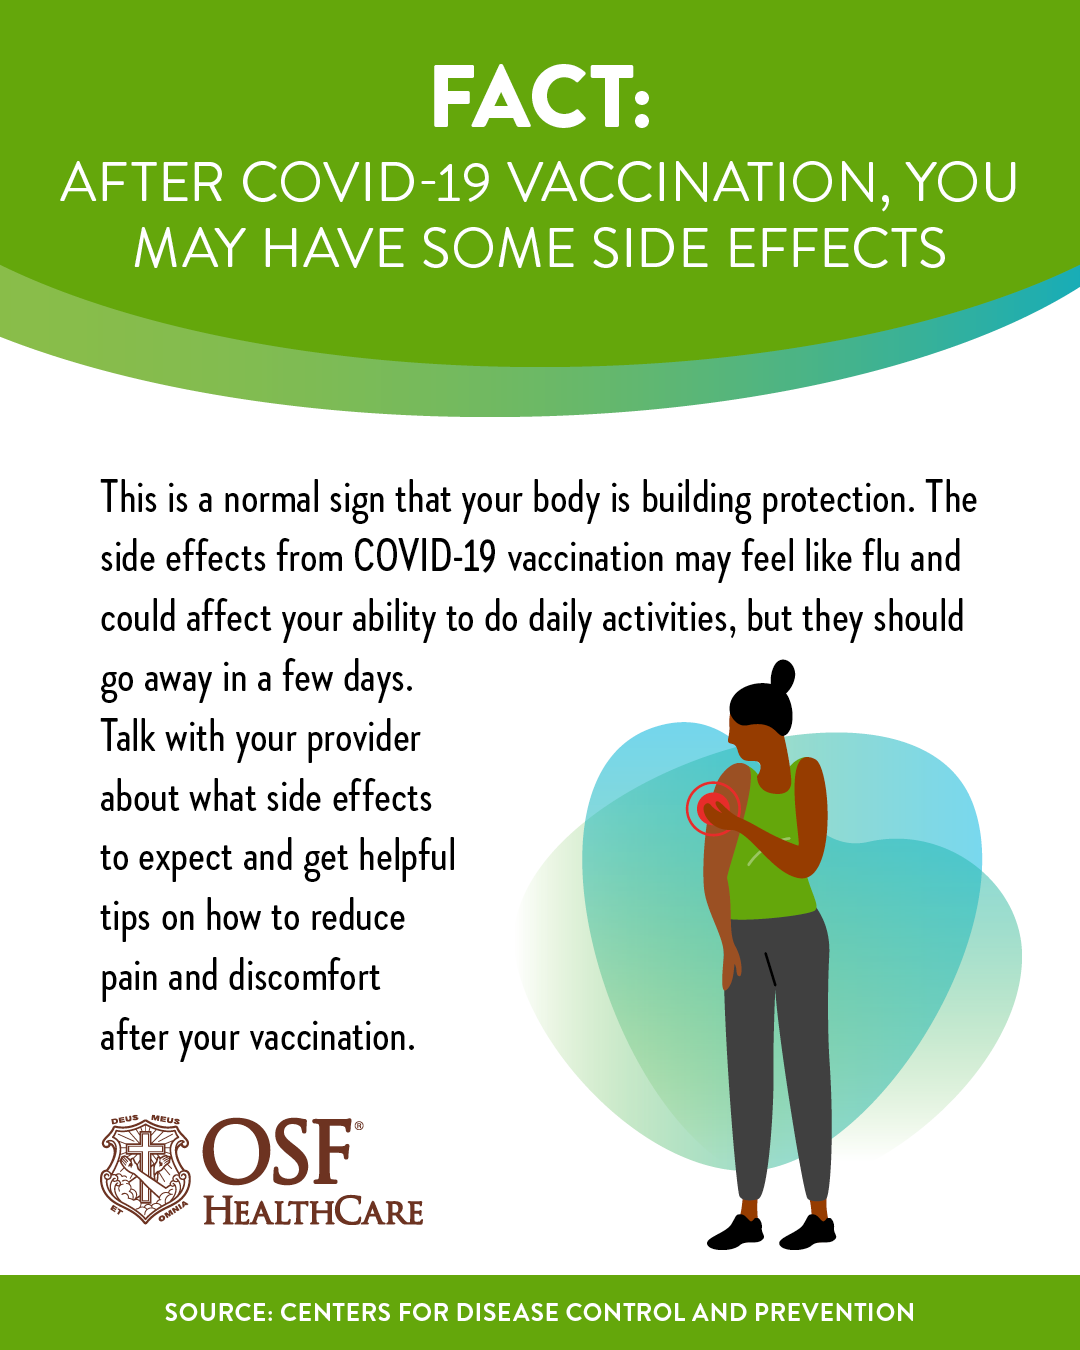 What to do after vaccination